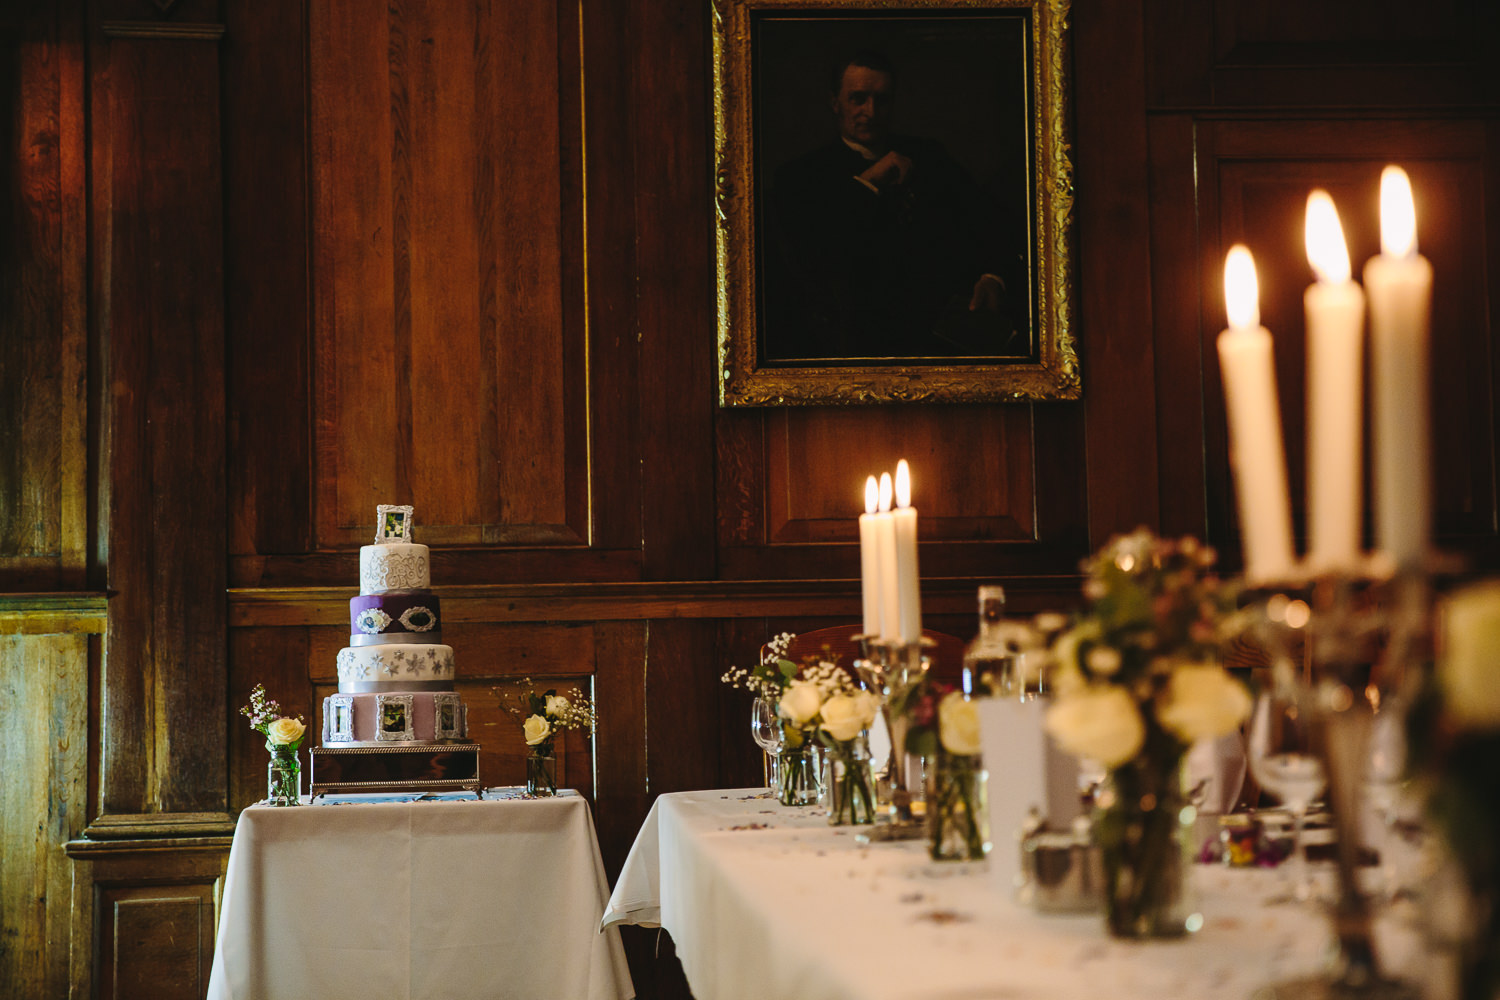 Purple and white Wedding cake situated next to a table decorated with flowers and candles inside Cambridge University Selwyn College